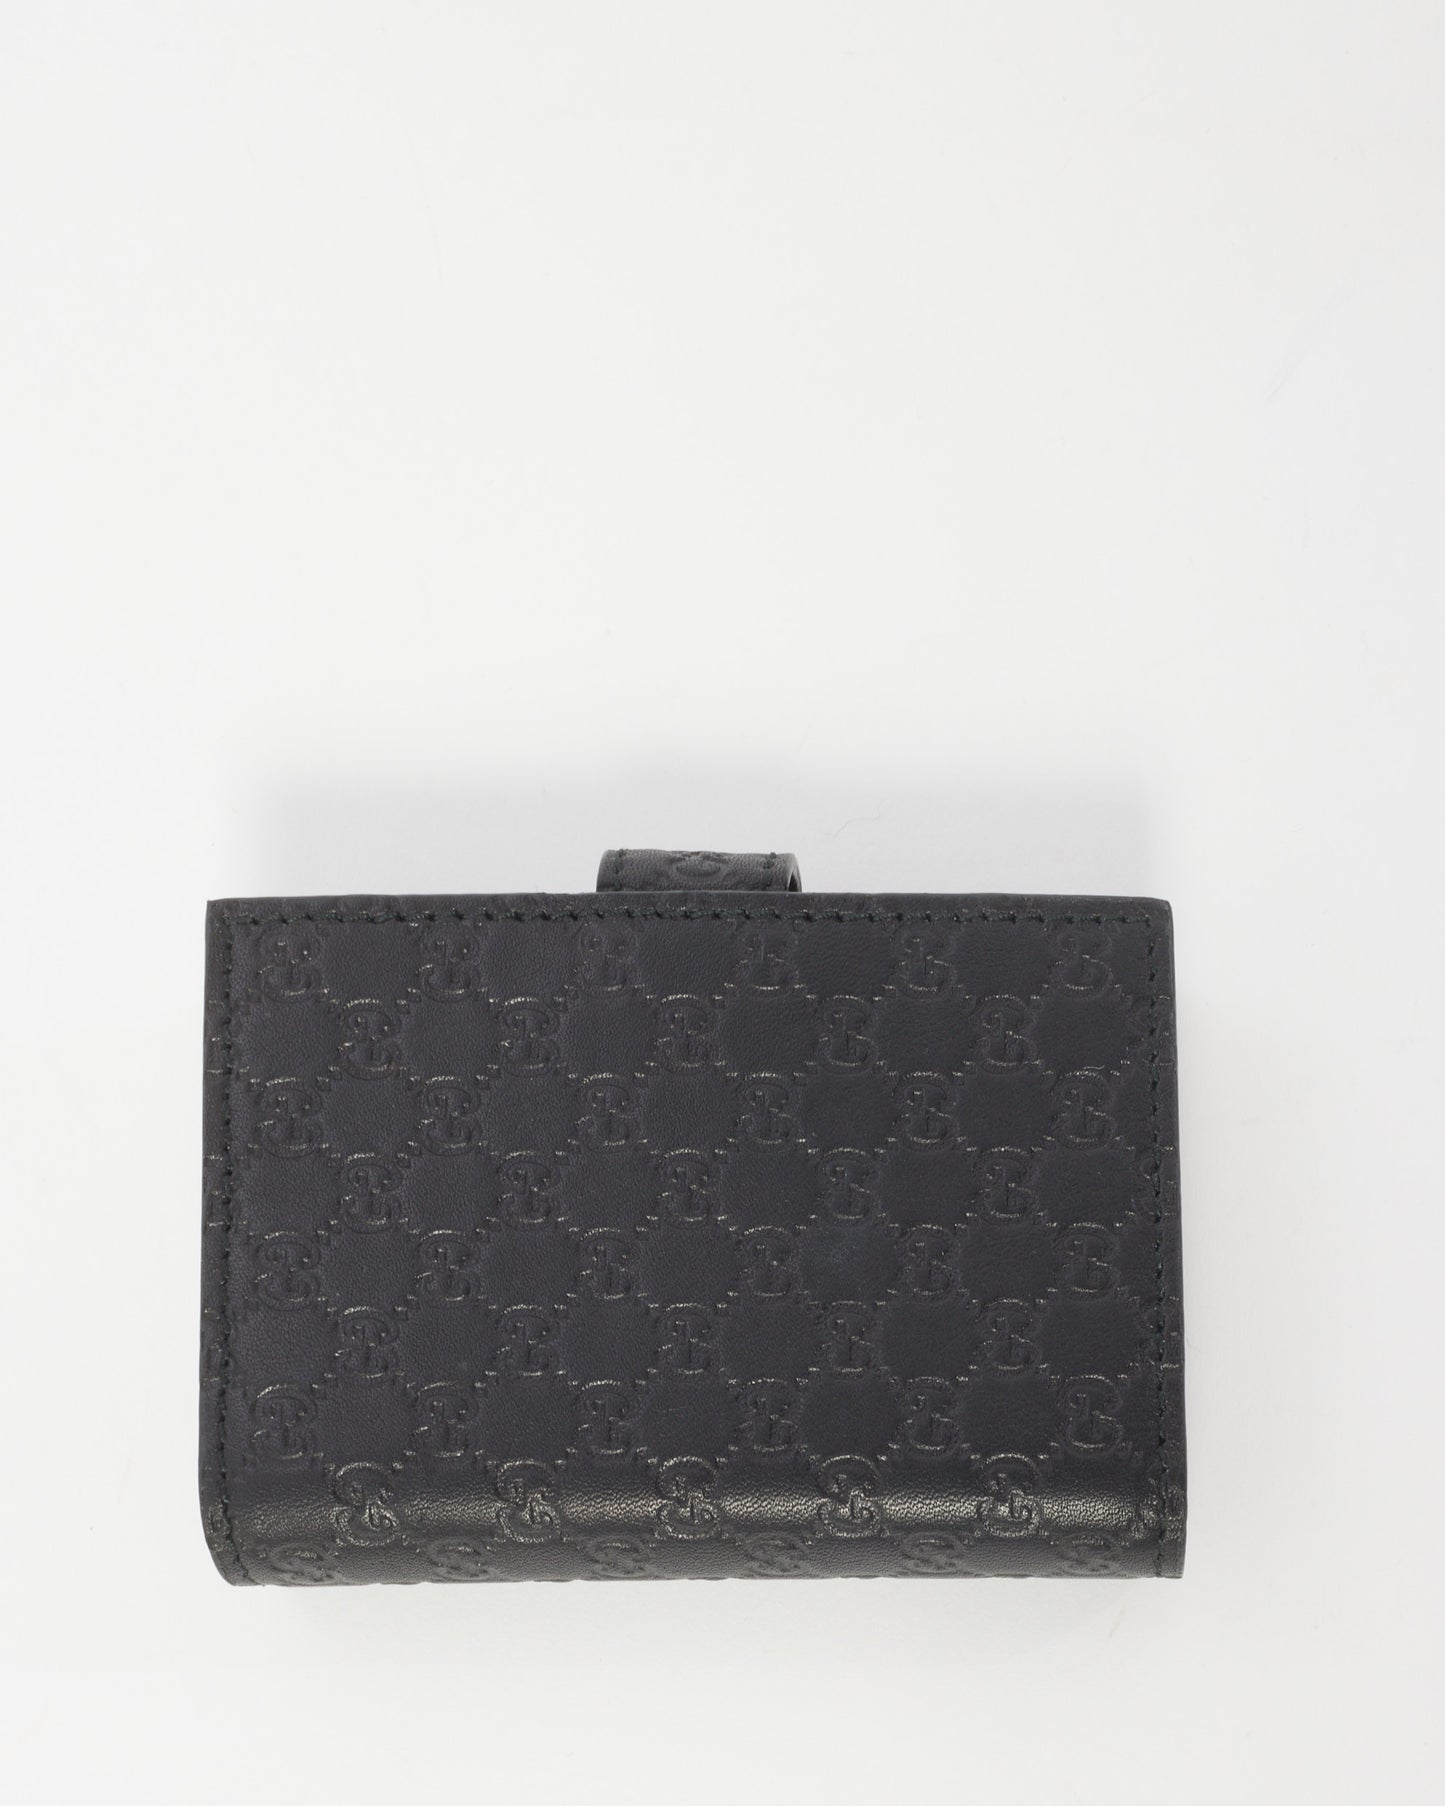 Gucci Black Leather Guccissima Flap Card Holder